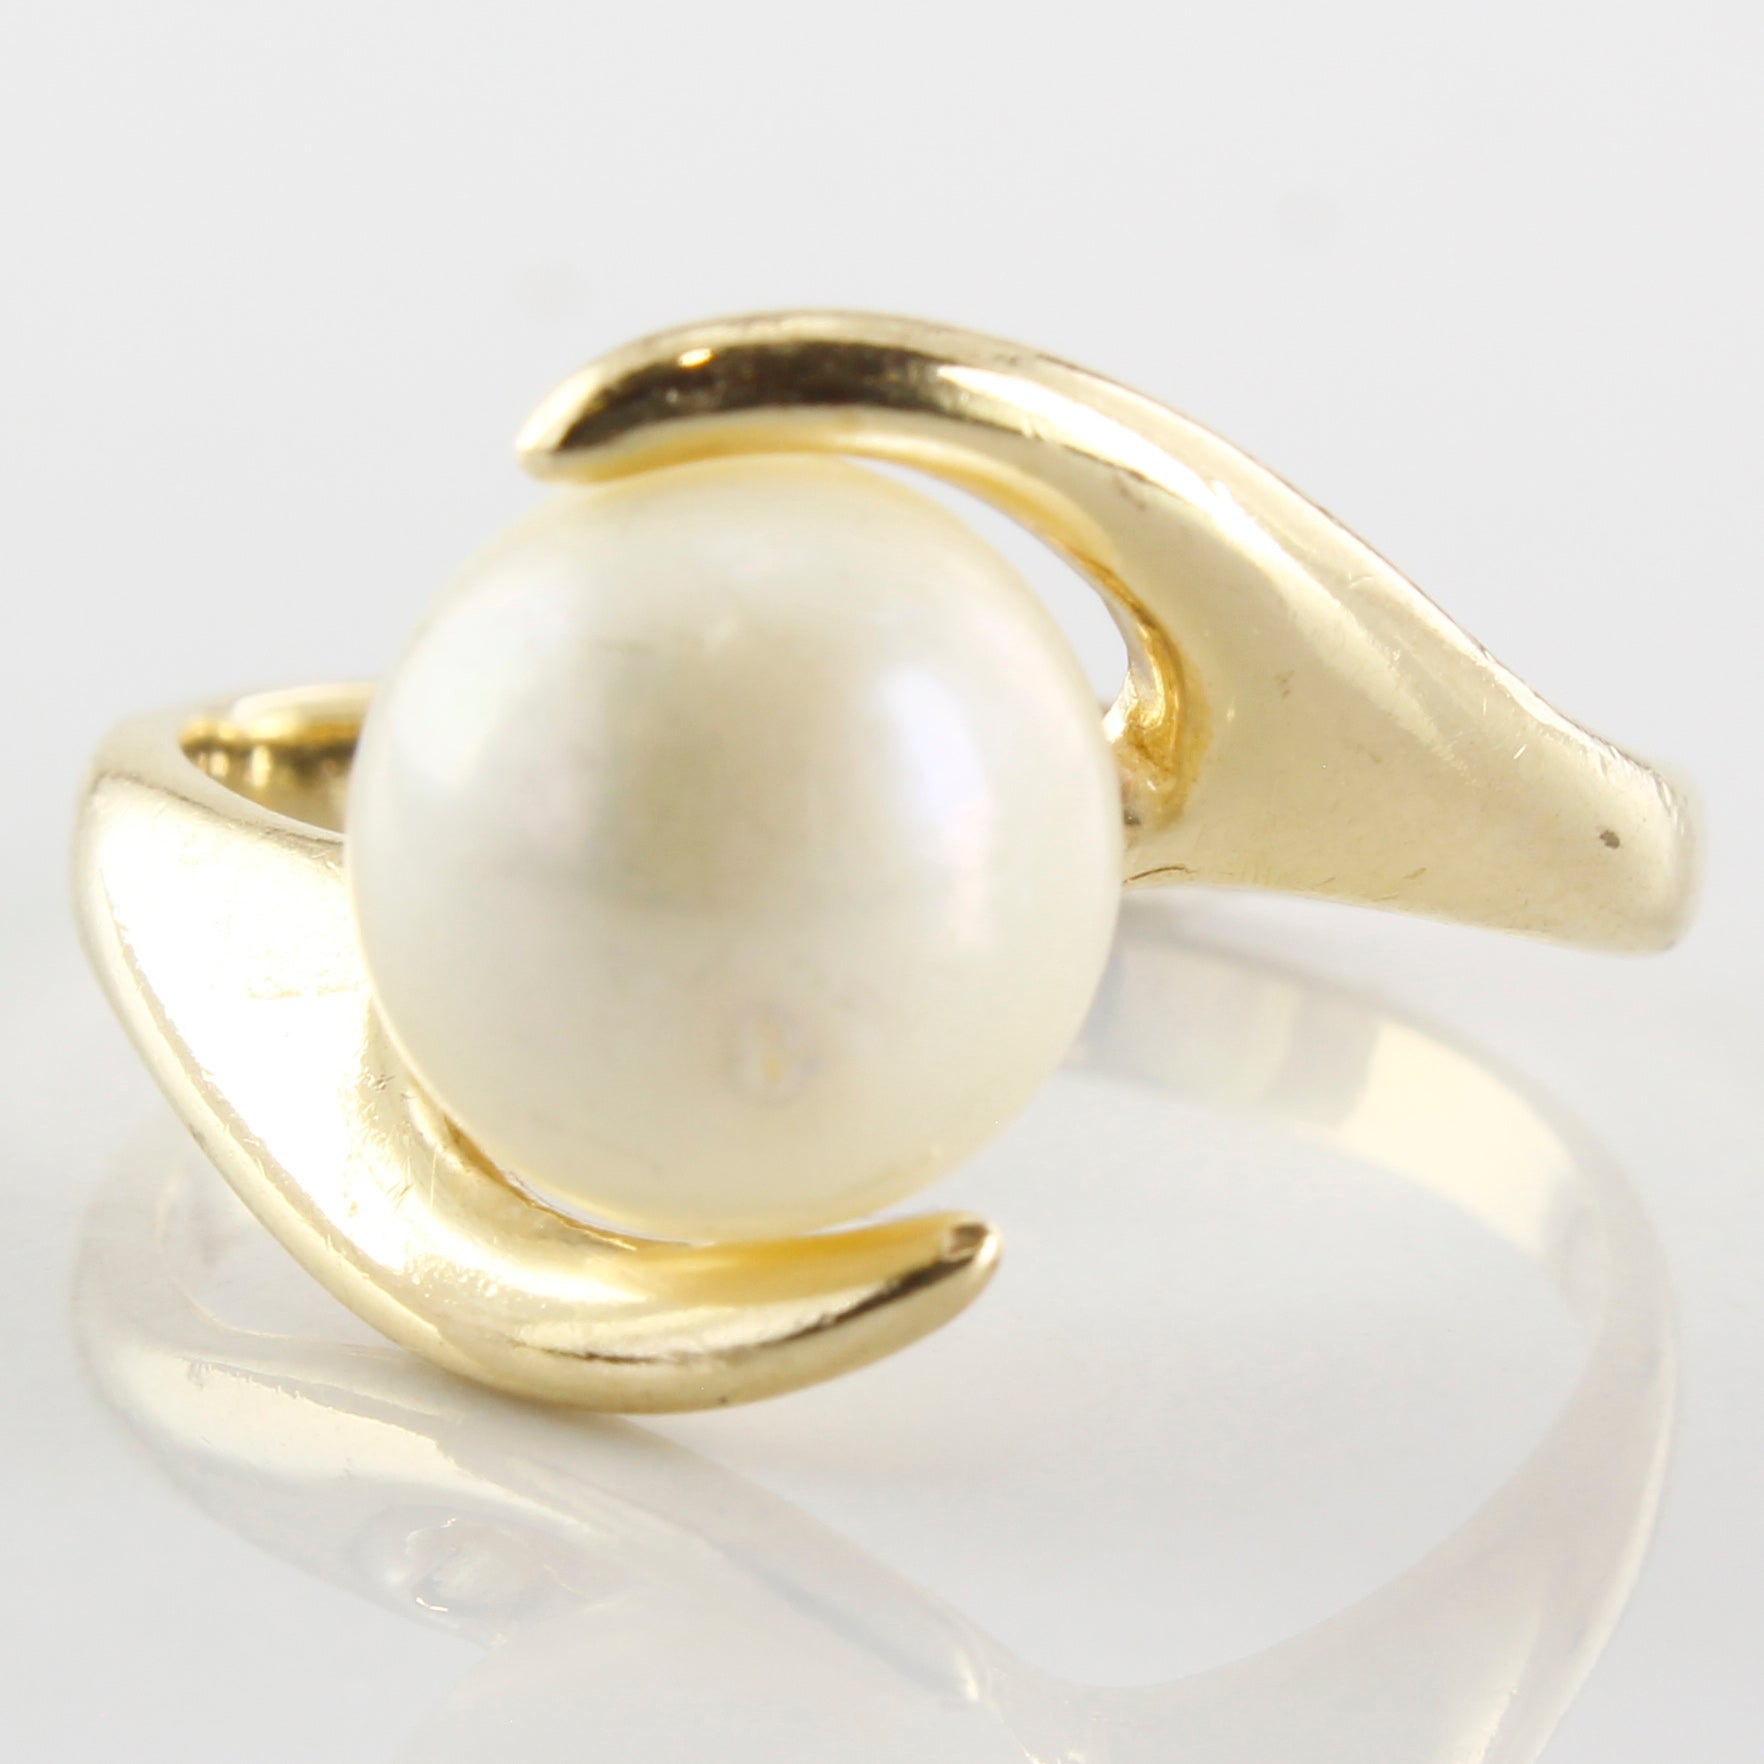 Pearl Bypass Ring | 4.34ct | SZ 7 |